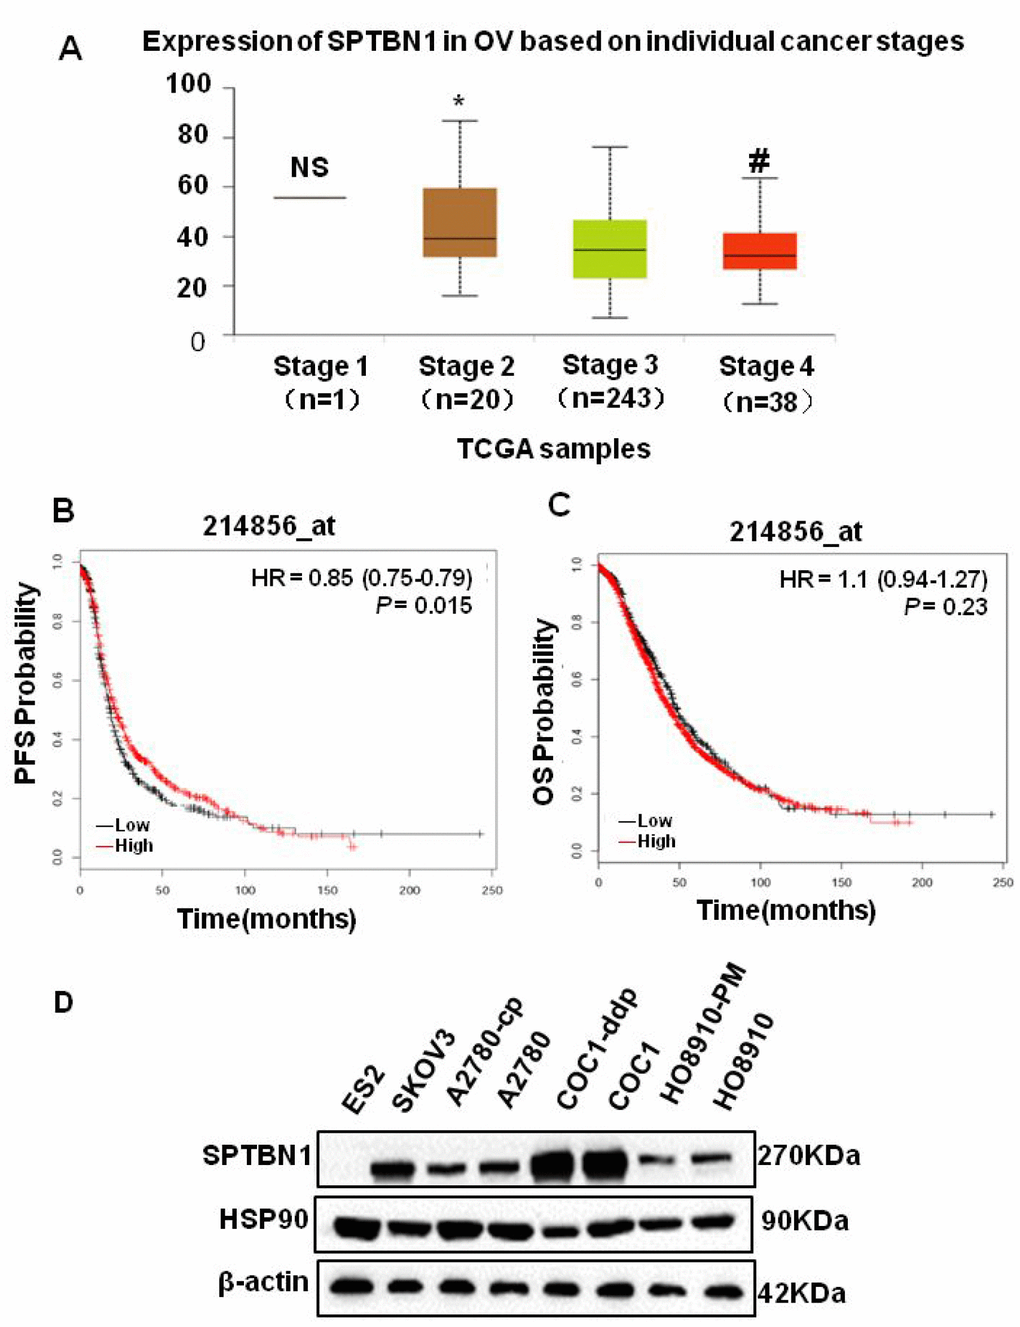 SPTBN1 is closely related to the progression of epithelial ovarian cancer. (A) Analysis of TCGA data. The expression of SPTBN1 was significantly decreased as EOC staging increased. NS: stage 1 vs stage 2, 3, and 4; *PPB, C) The progression-free survival (PFS) and overall survival (OS) rates were retrieved from the TCGA dataset (probe 214856